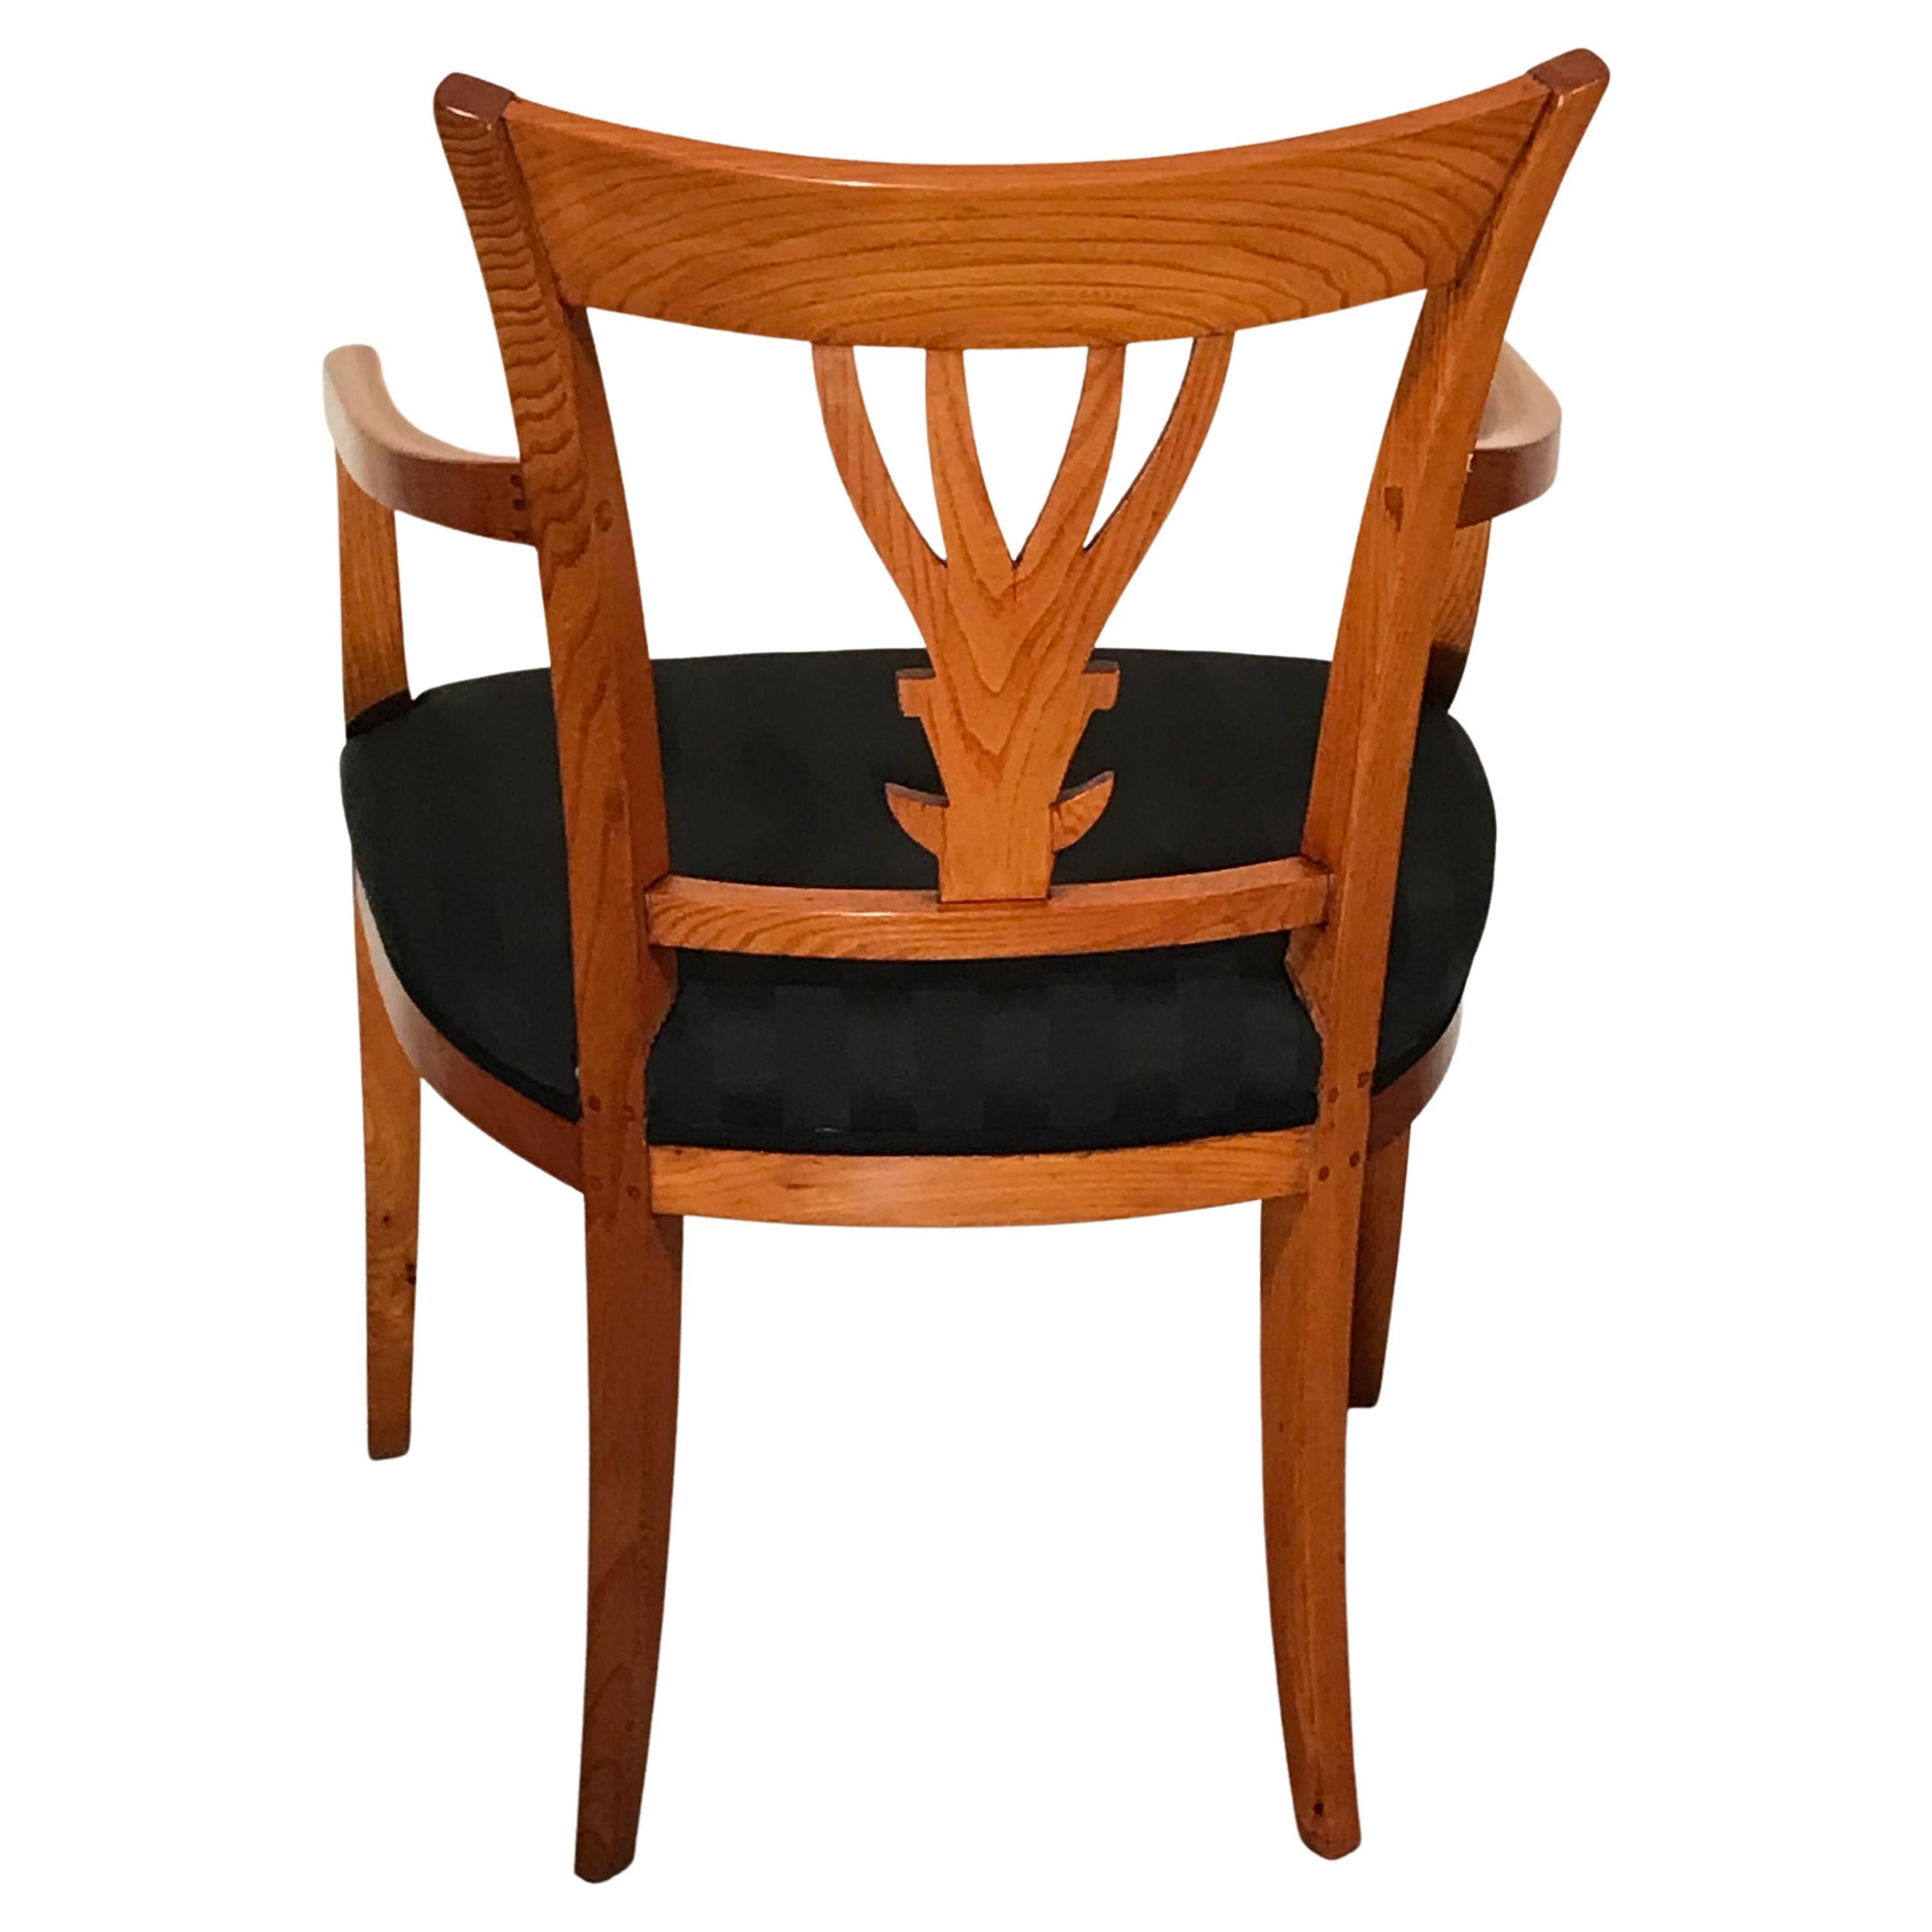 Beautifully designed neoclassical armchair dating back to around 1810-30. The chair comes from Southwest Germany. The back has a very pretty open work design with a hand carved leave design. The armchair is refinished and has a new upholstery and is